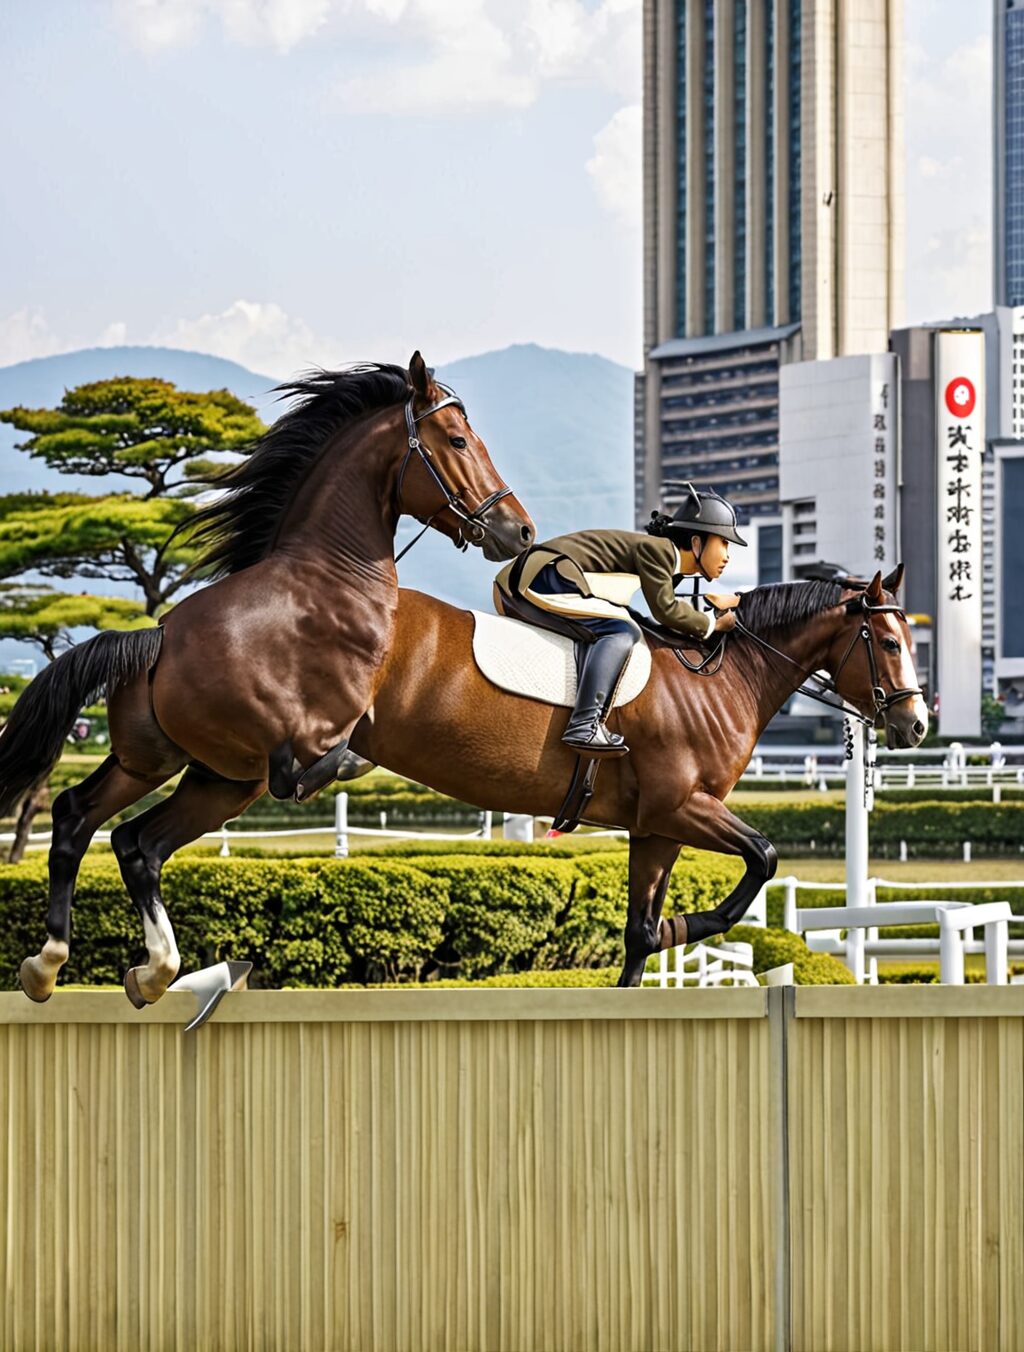 when did japan get horses